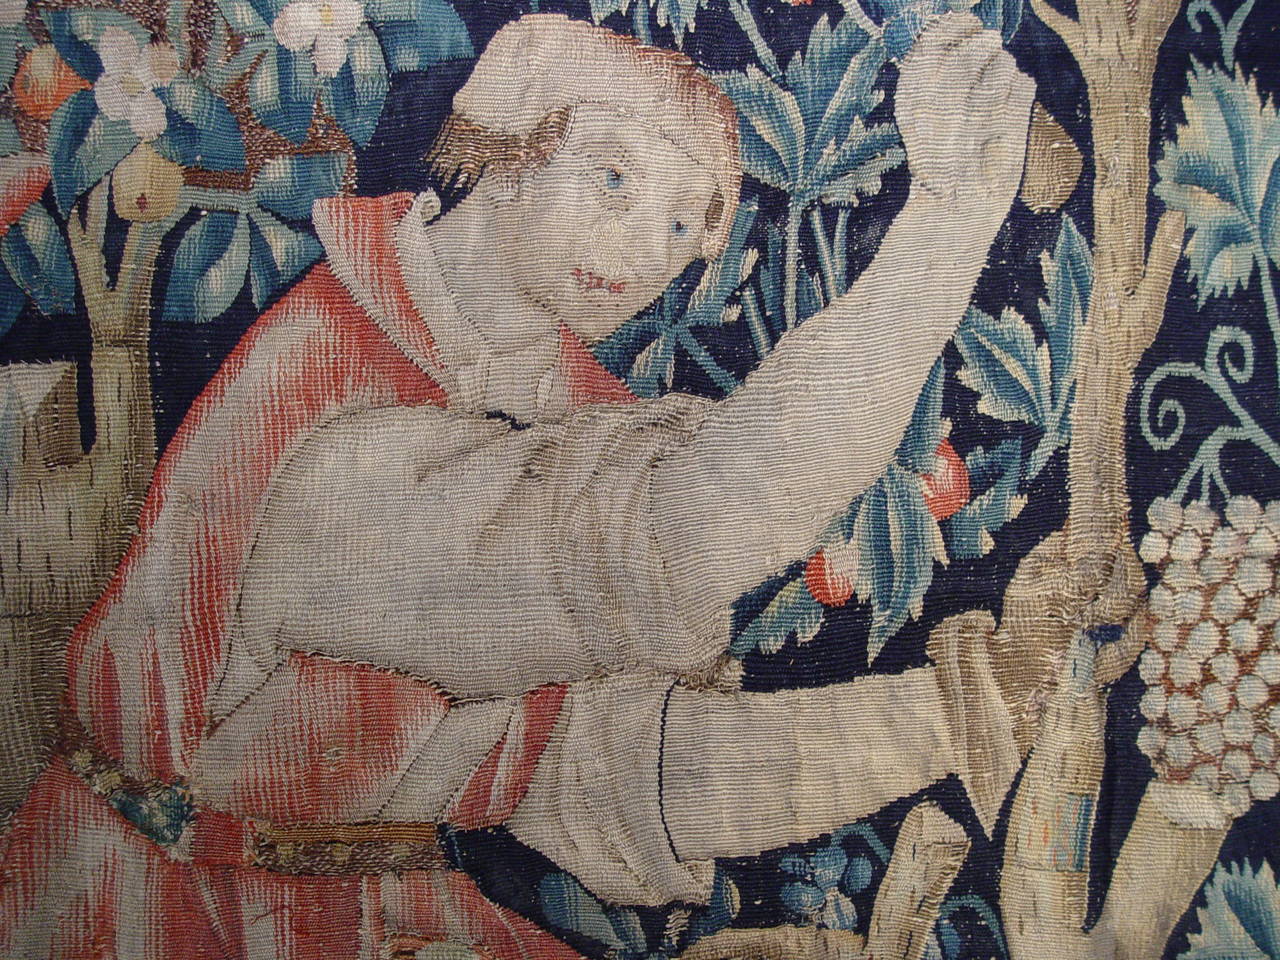 Gothic 15th Century Flemish Fragment of a Tournai Tapestry 